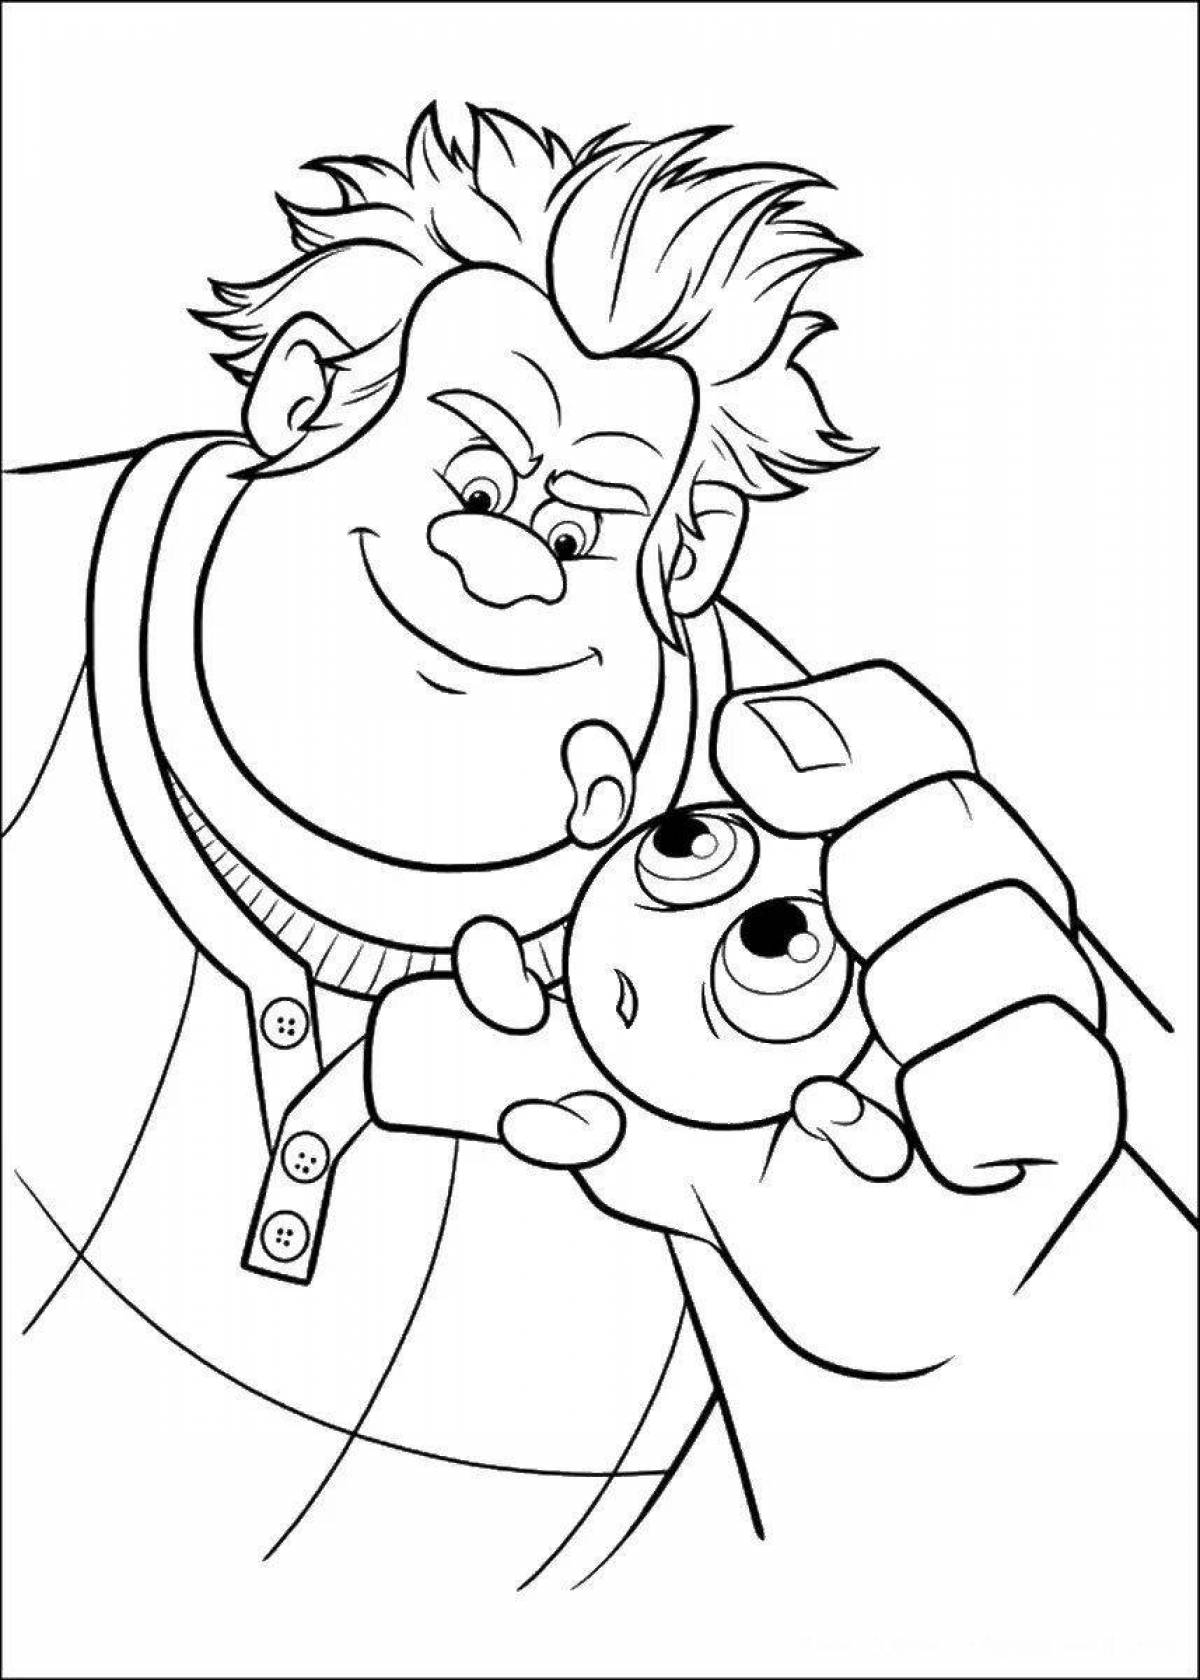 Charming penelope coloring book